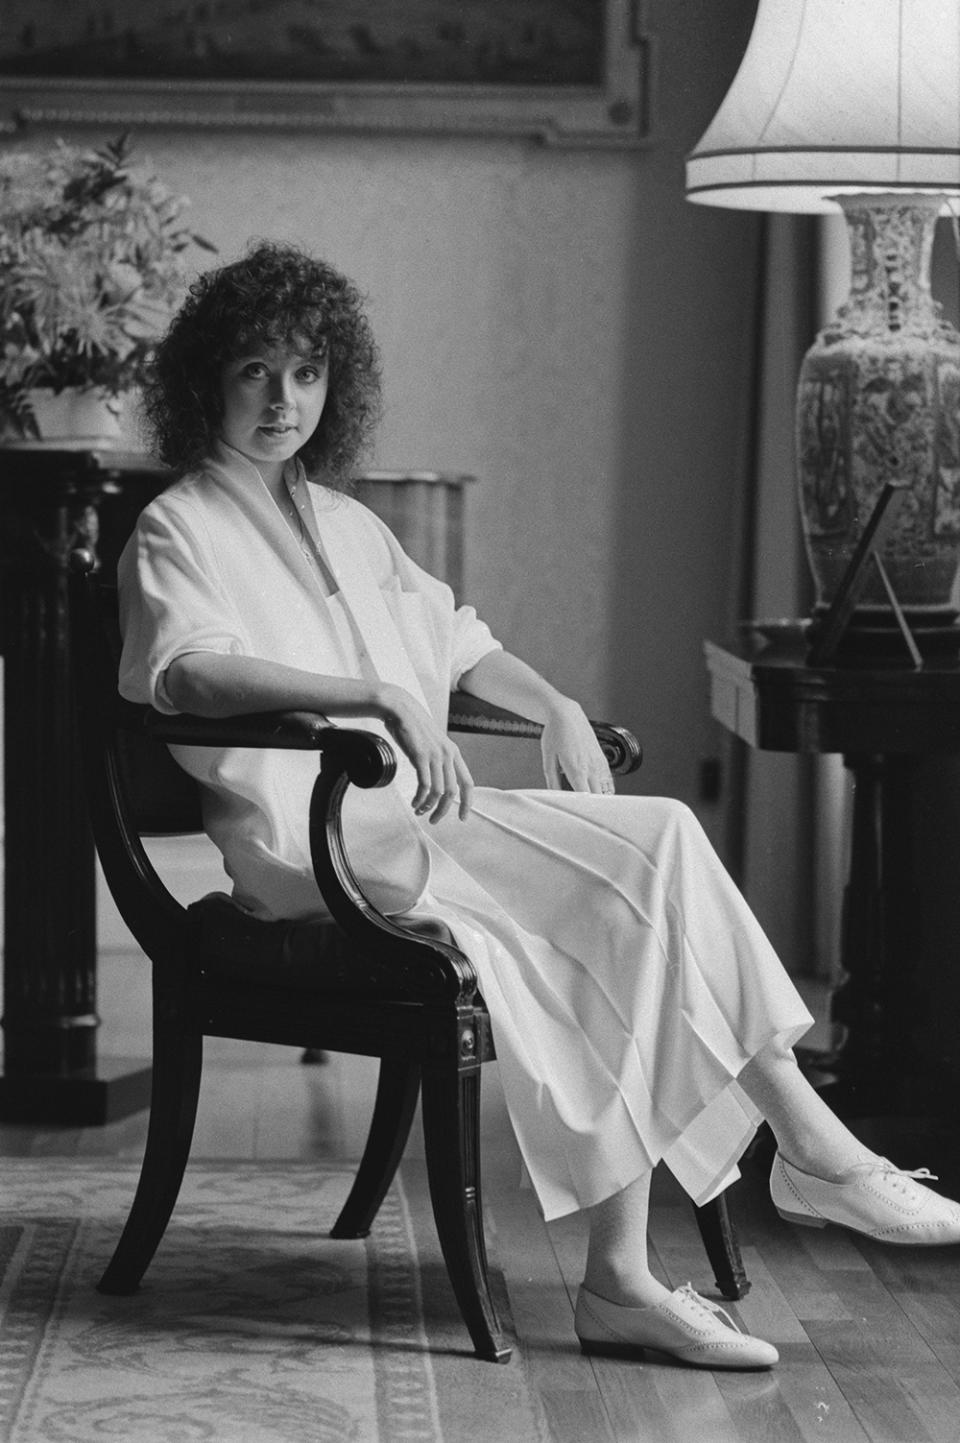 British soprano Sarah Brightman sitting in a chair, her arms on the armrests, United Kingdom, 1st April 1985. (Photo by Rogers/Daily Express/Hulton Archive/Getty Images)